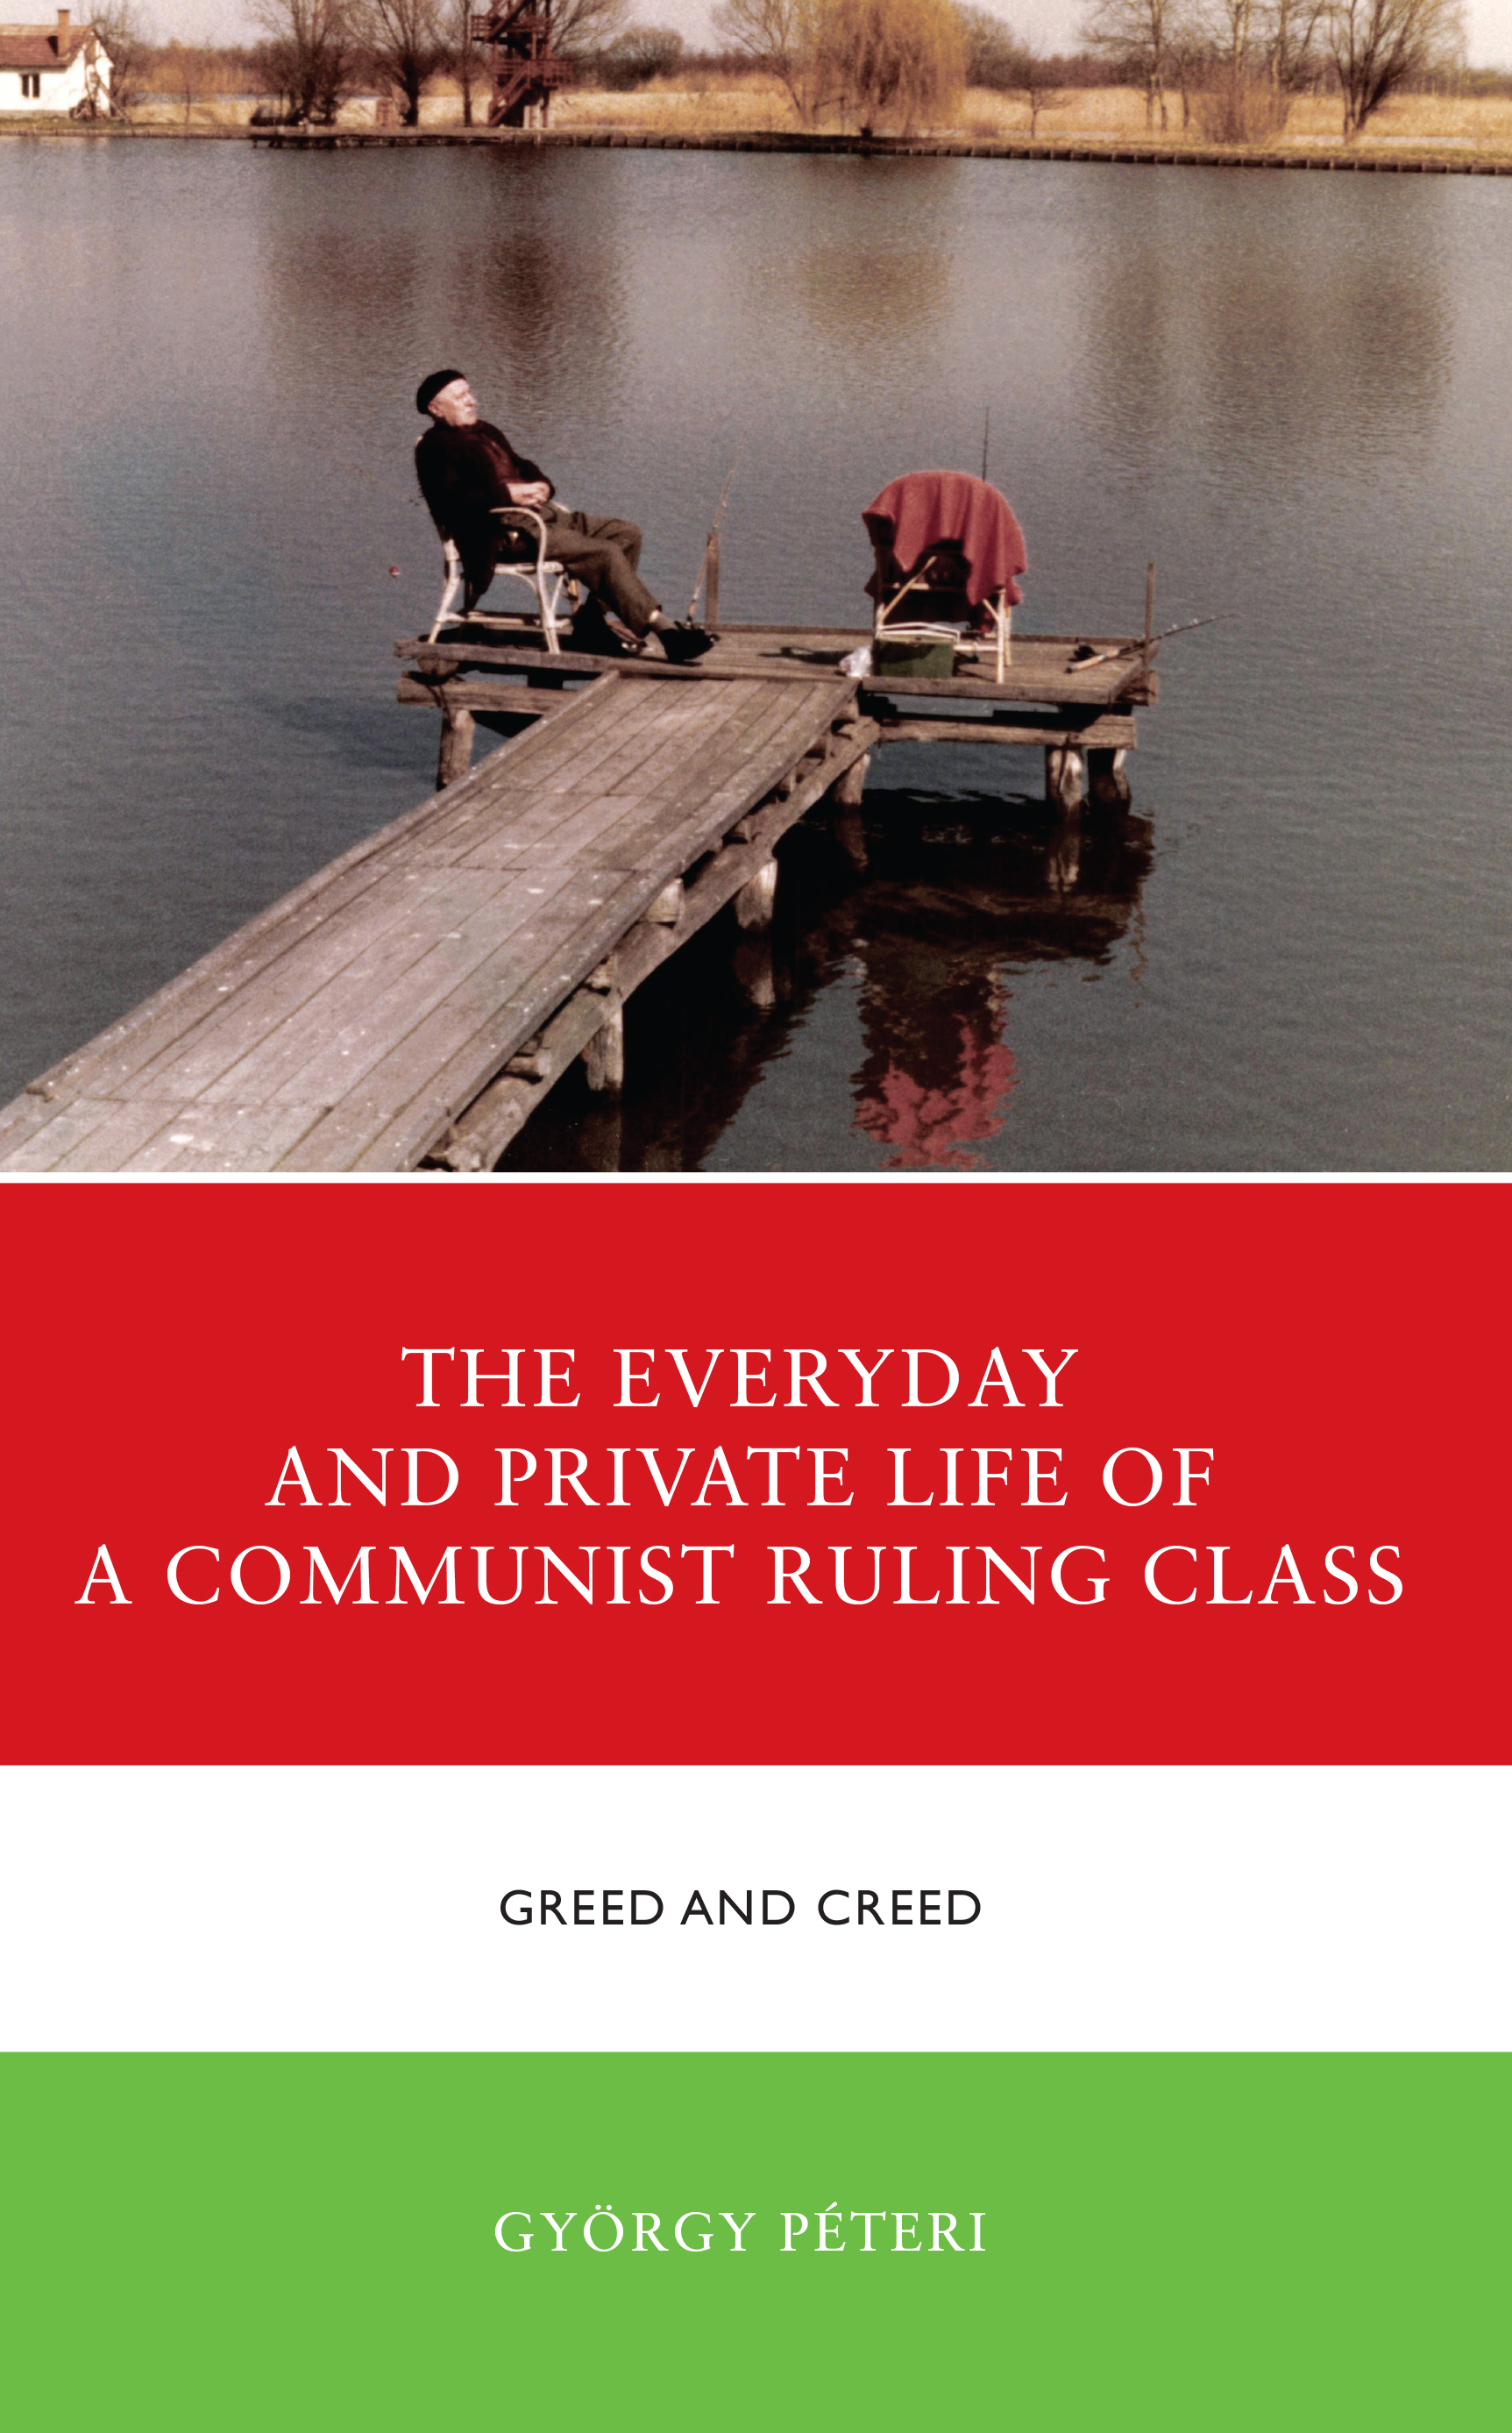 The Everyday and Private Life of a Communist Ruling Class: Greed and Creed